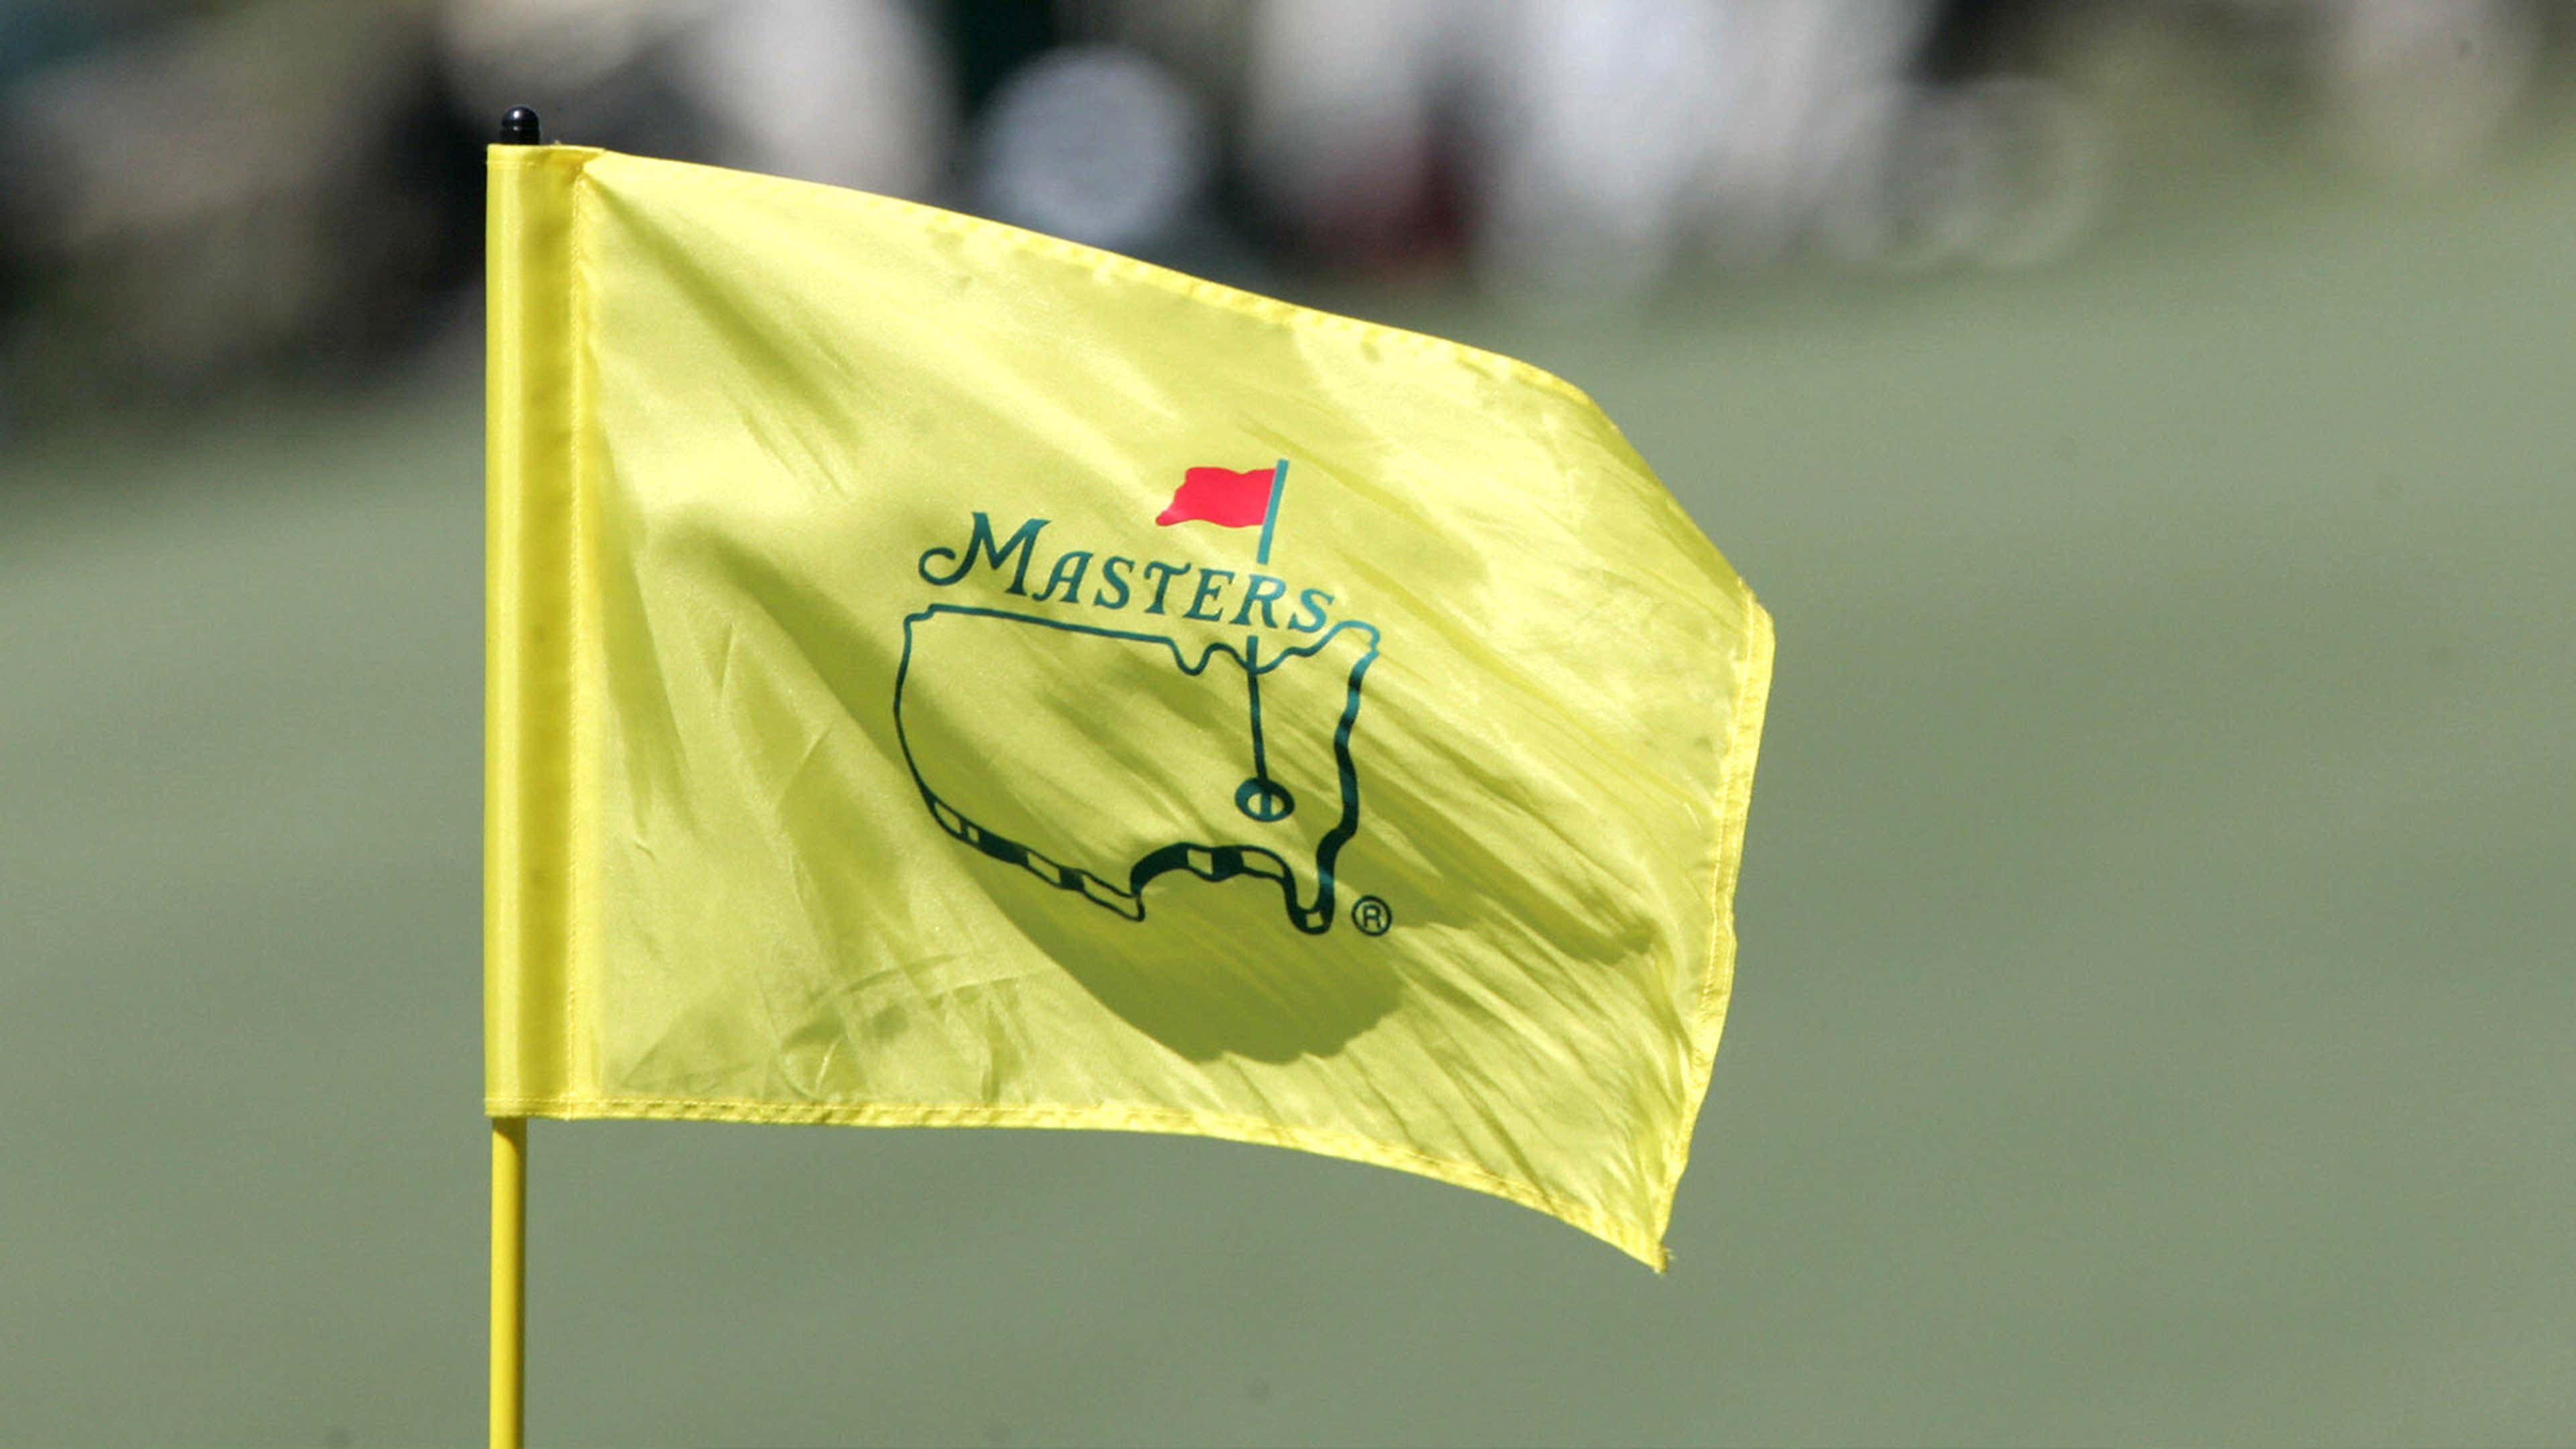 The Masters: Where to watch online, TV channels, live streams